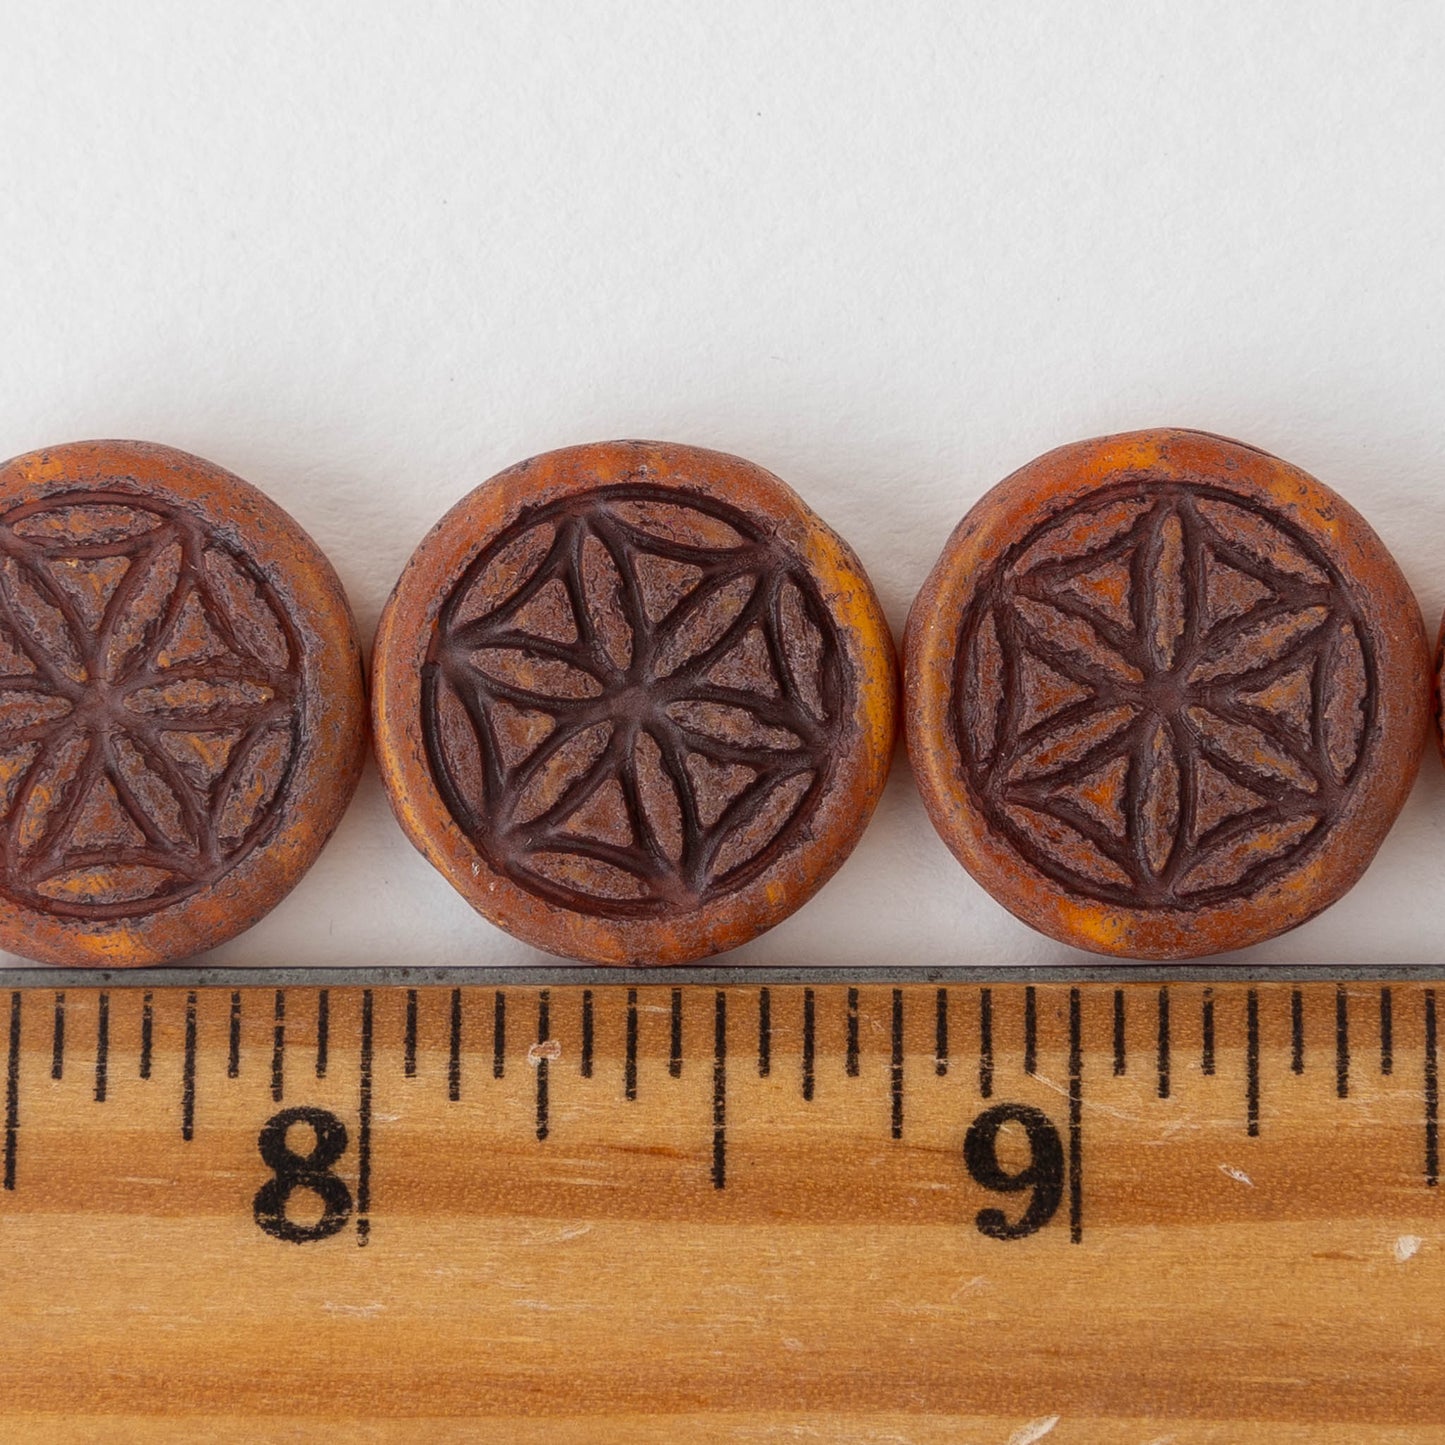 19mm Flower of Life Coin Bead - Terra Cotta Matte with Brown Wash - 2 beads